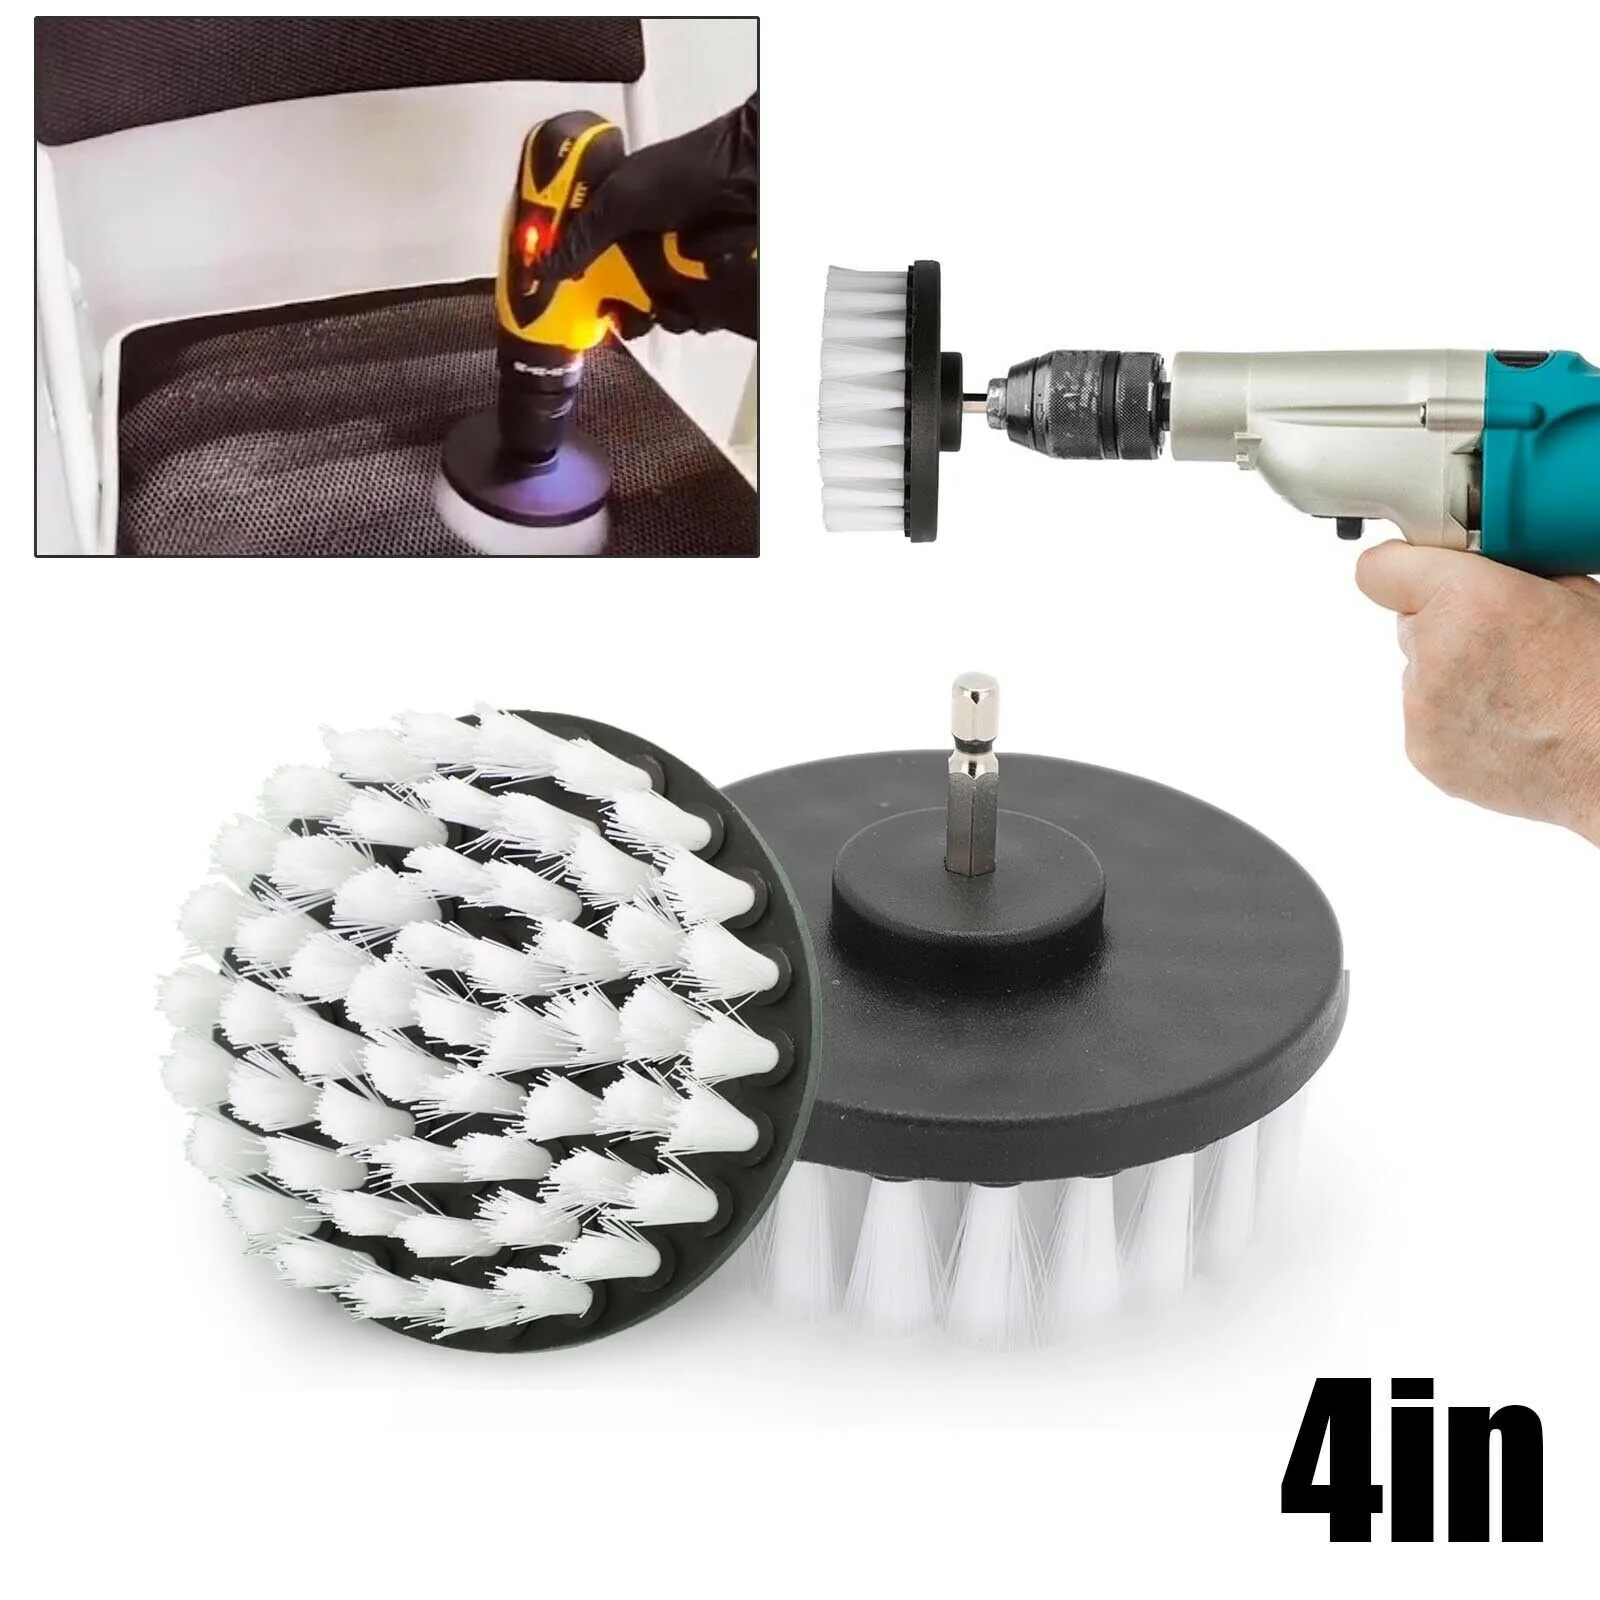 4 Inch Soft Drill Brush For Home Car Carpet And Leather Cleaning Car Washing Maintenance Brushes Car Accessories 1